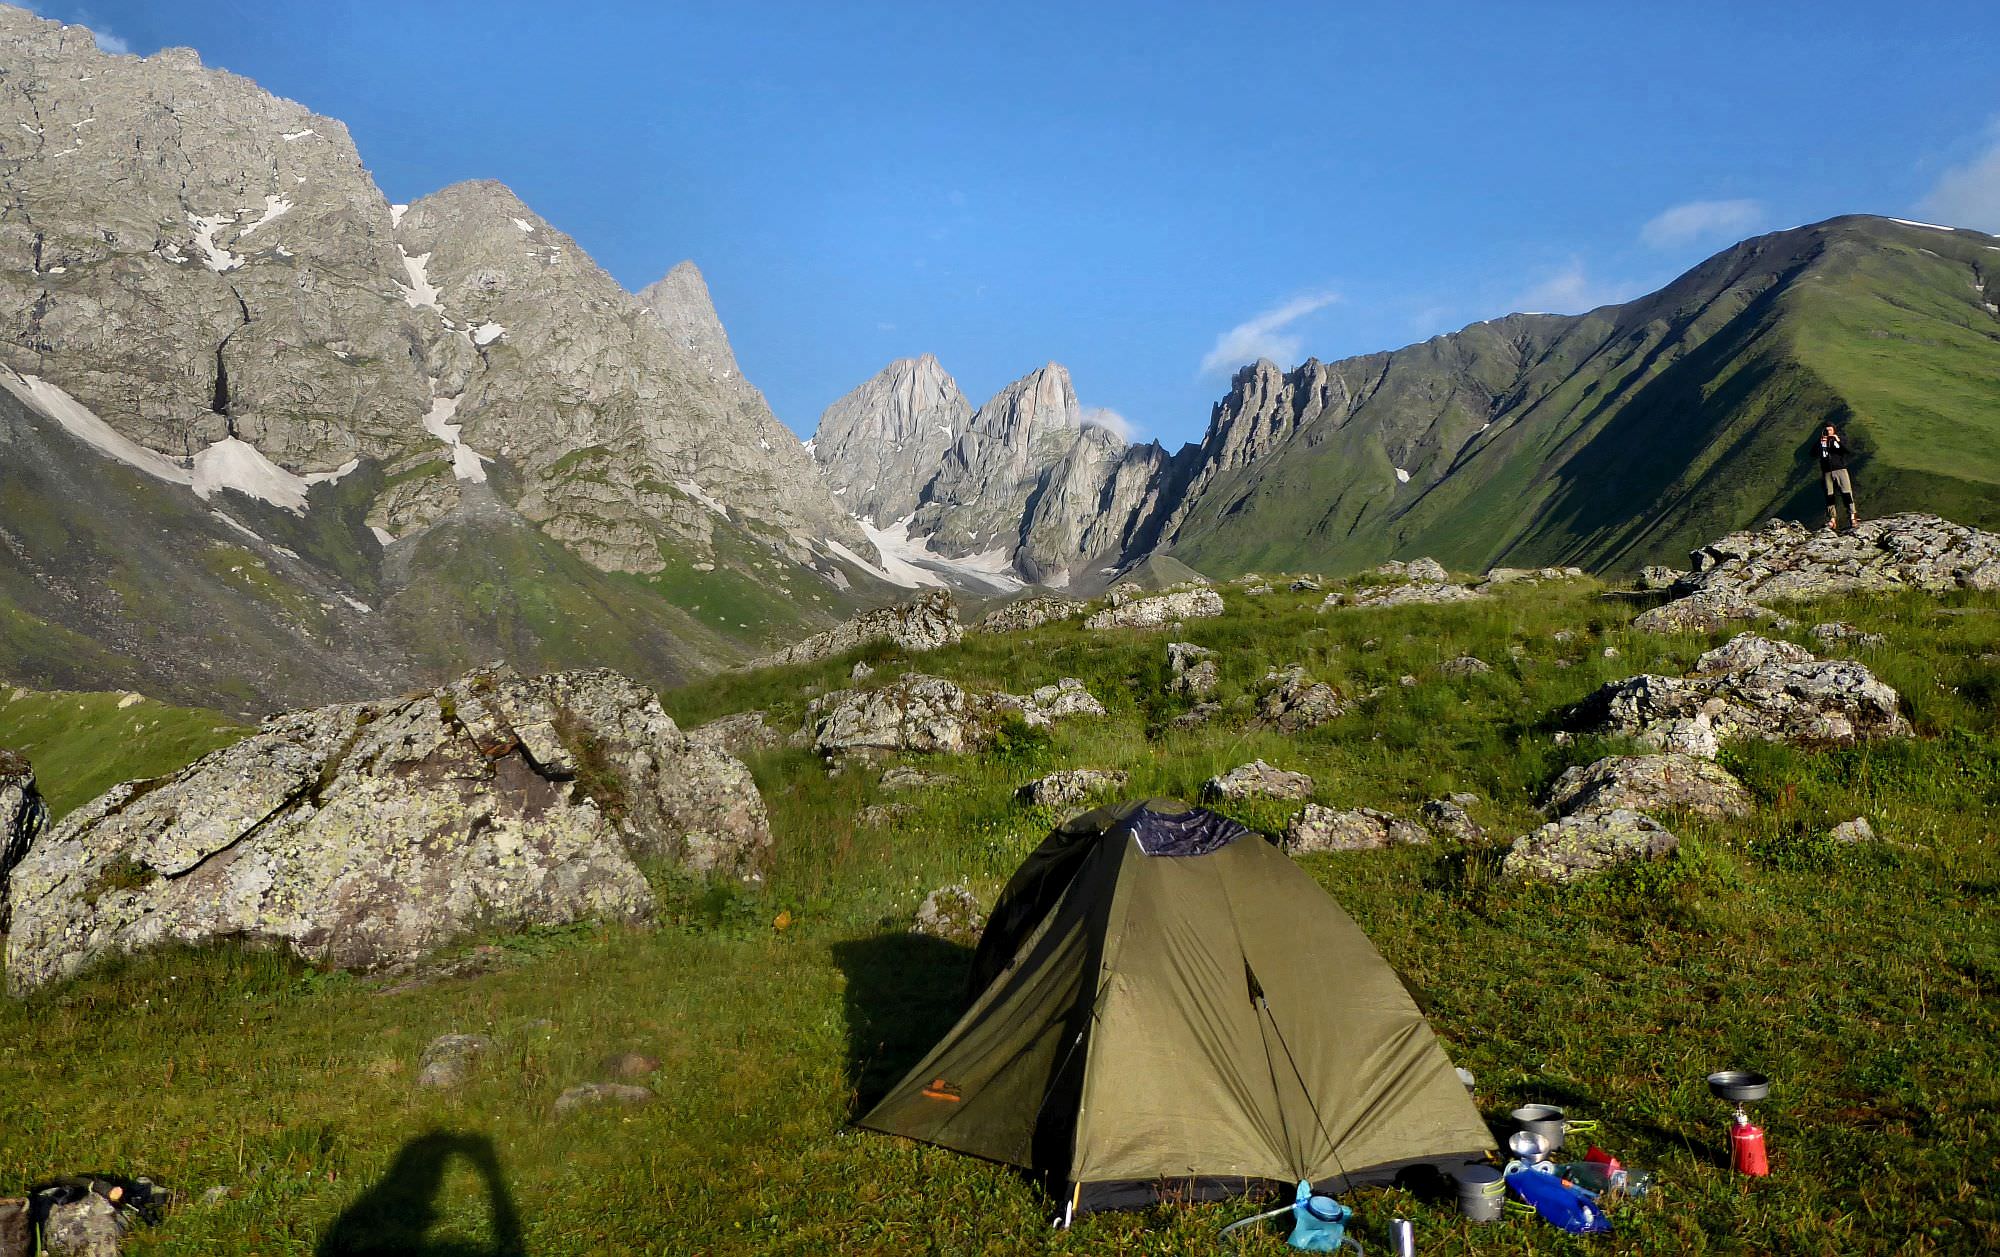 Camping by Abudelauri lakes